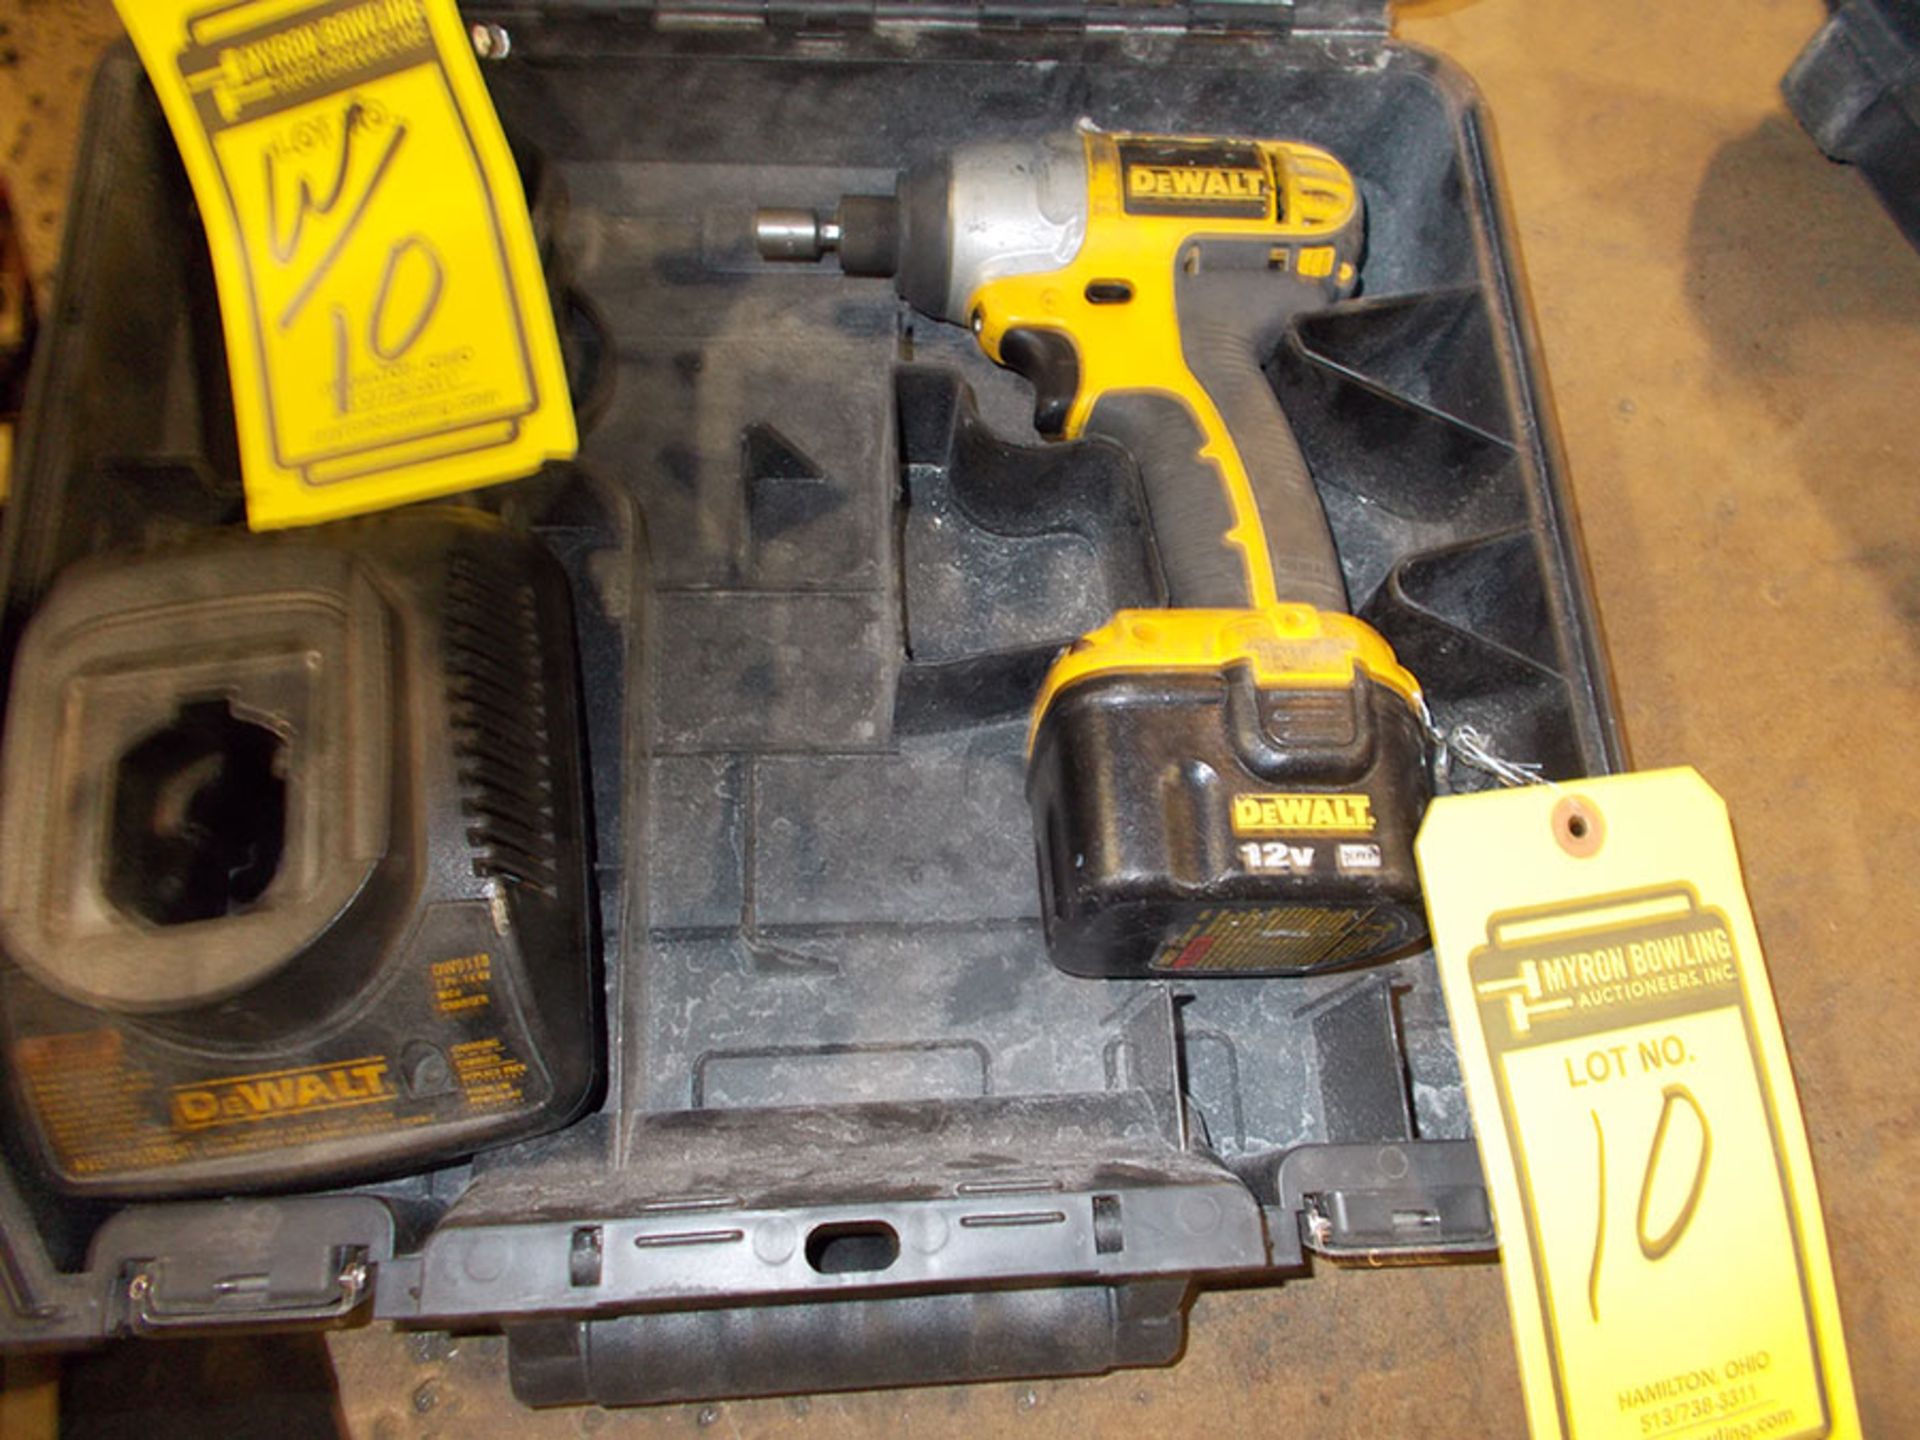 DEWALT 12 VOLT BATTERY DRILL WITH QUICK CONNECT CHUCK & CHARGER